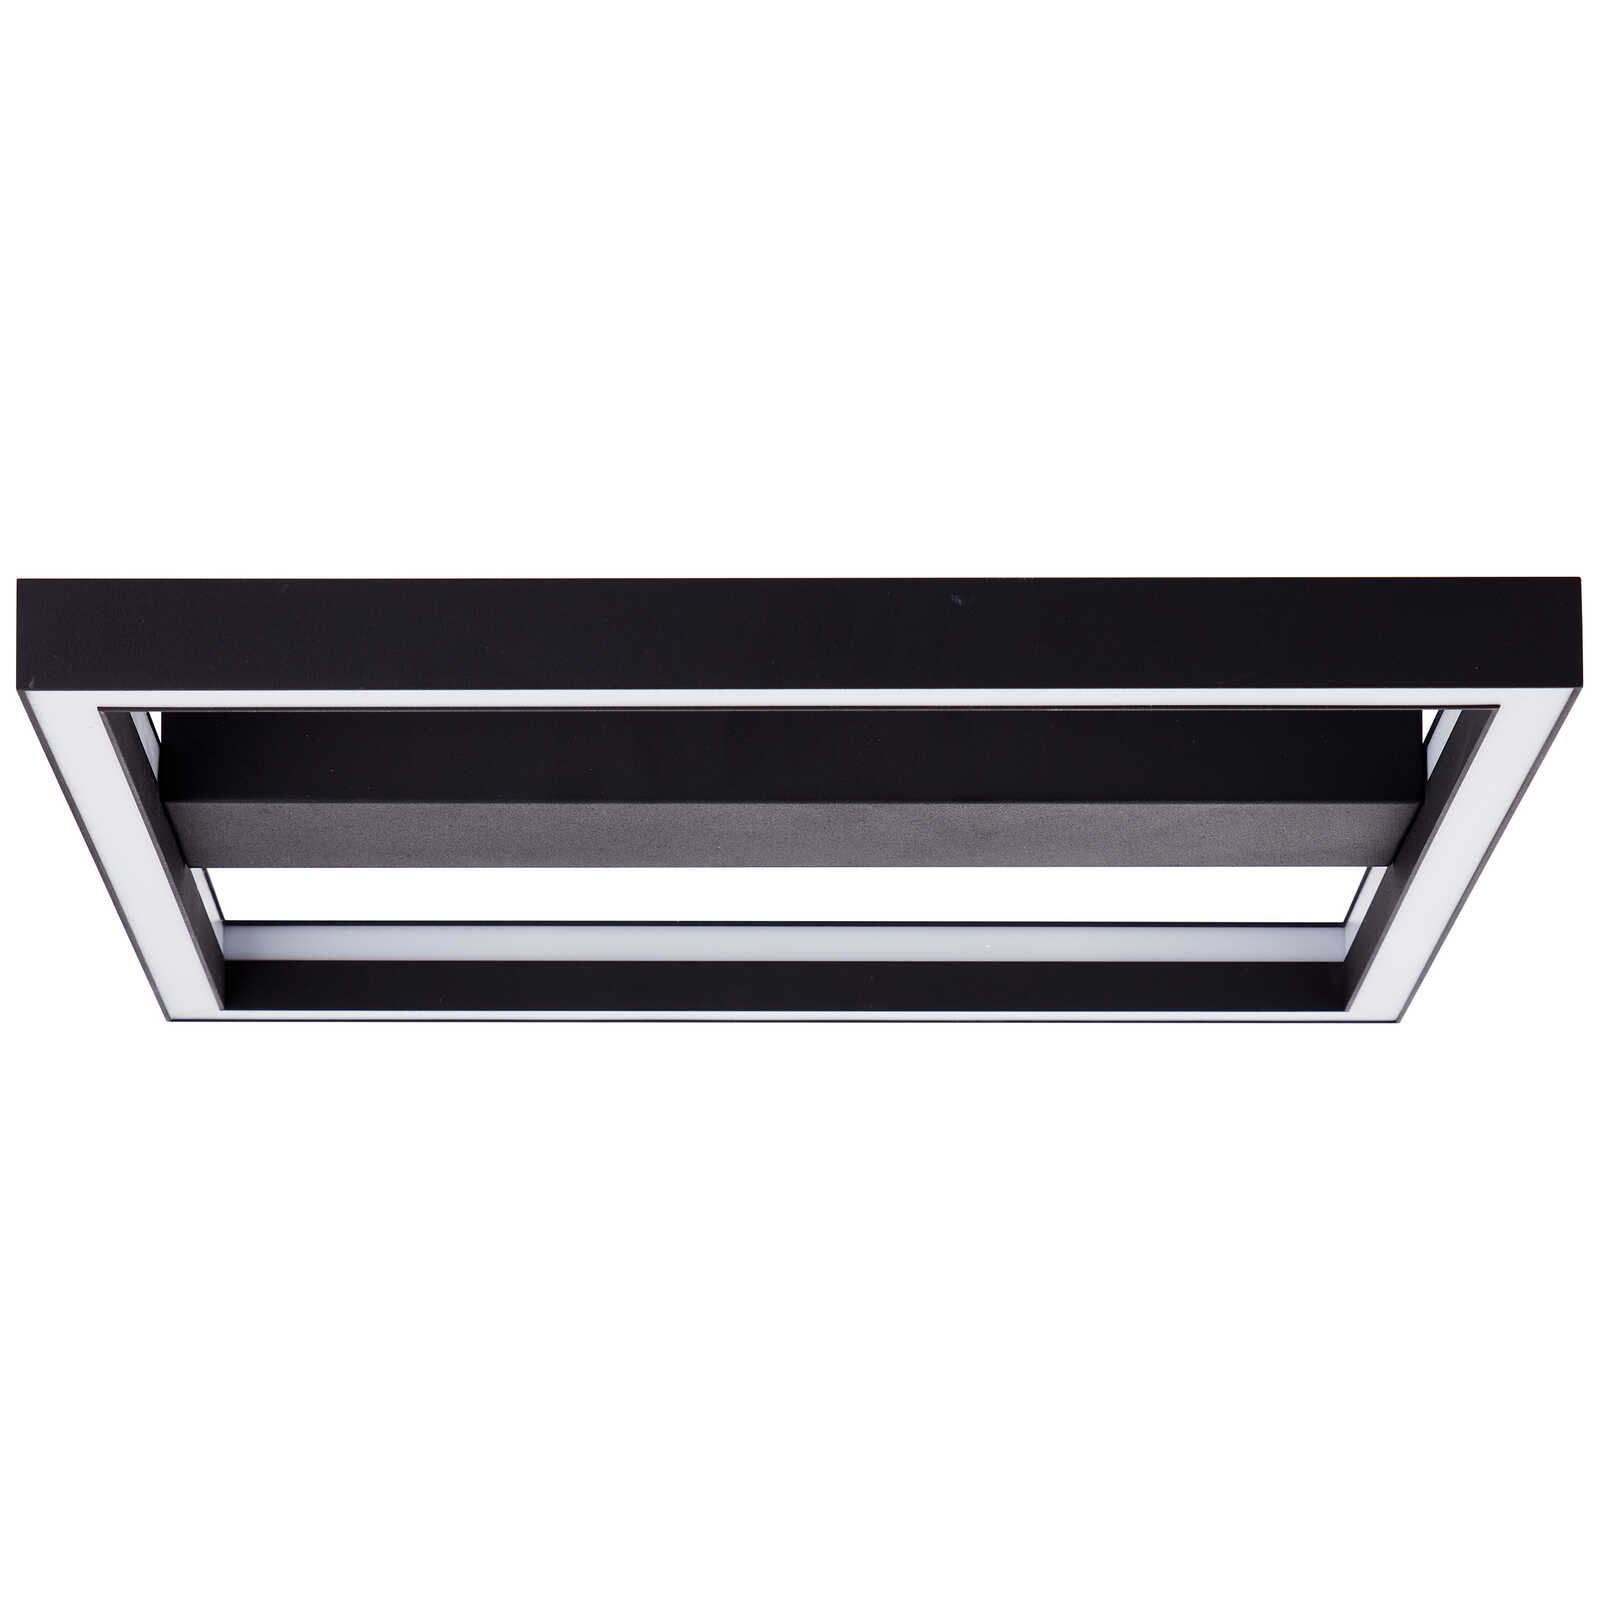             Plastic wall and ceiling light - Janis 4 - Black
        